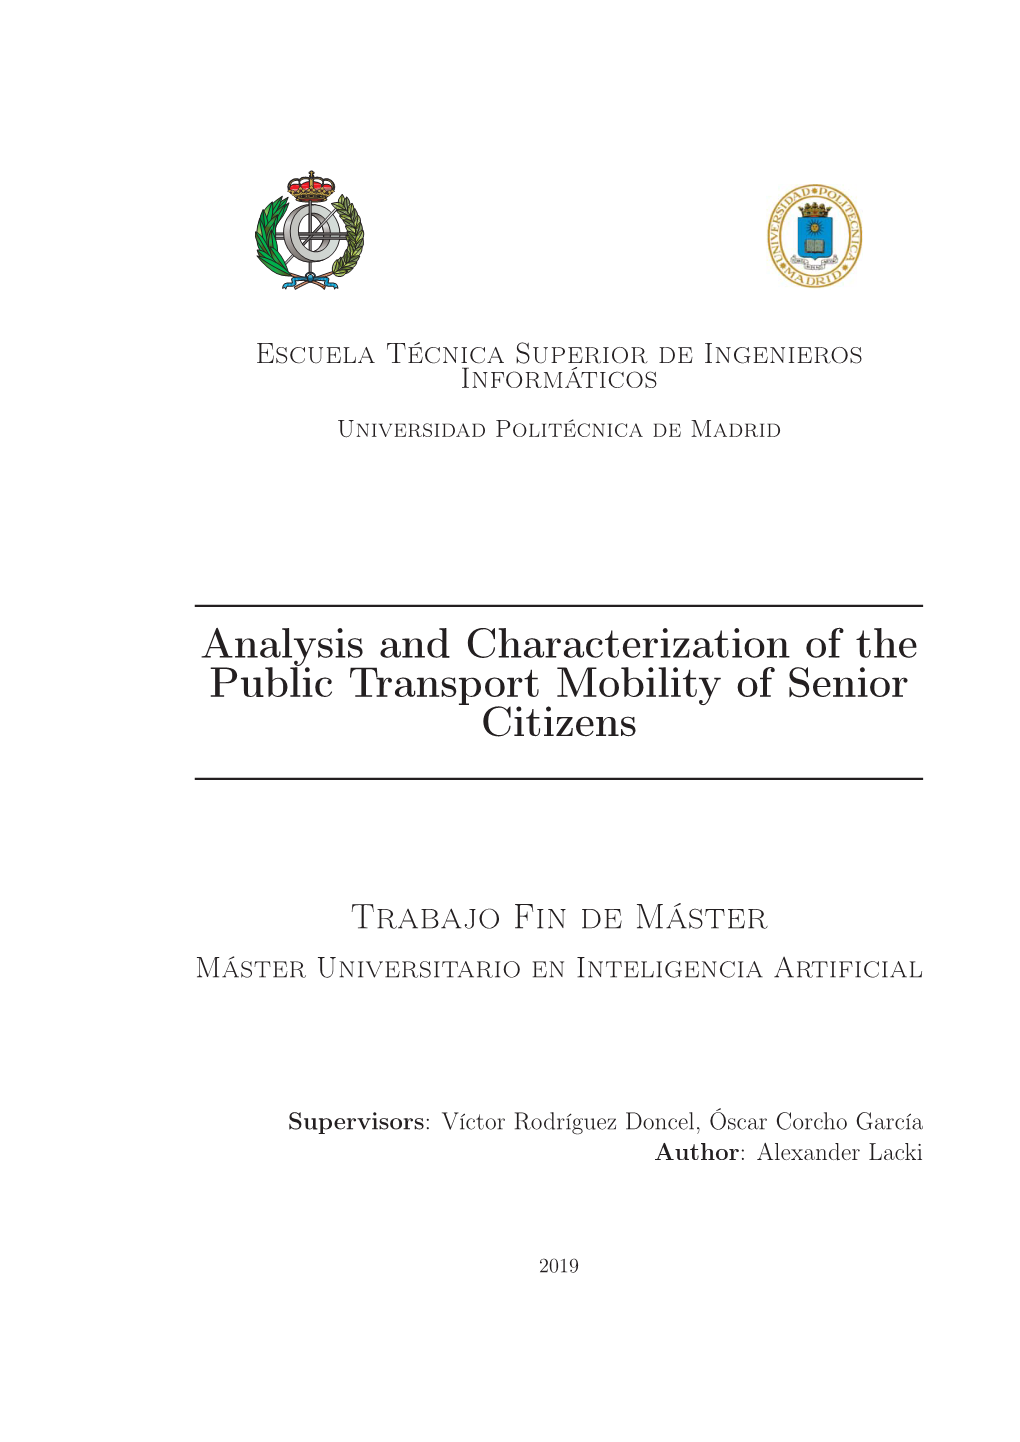 Analysis and Characterization of the Public Transport Mobility of Senior Citizens